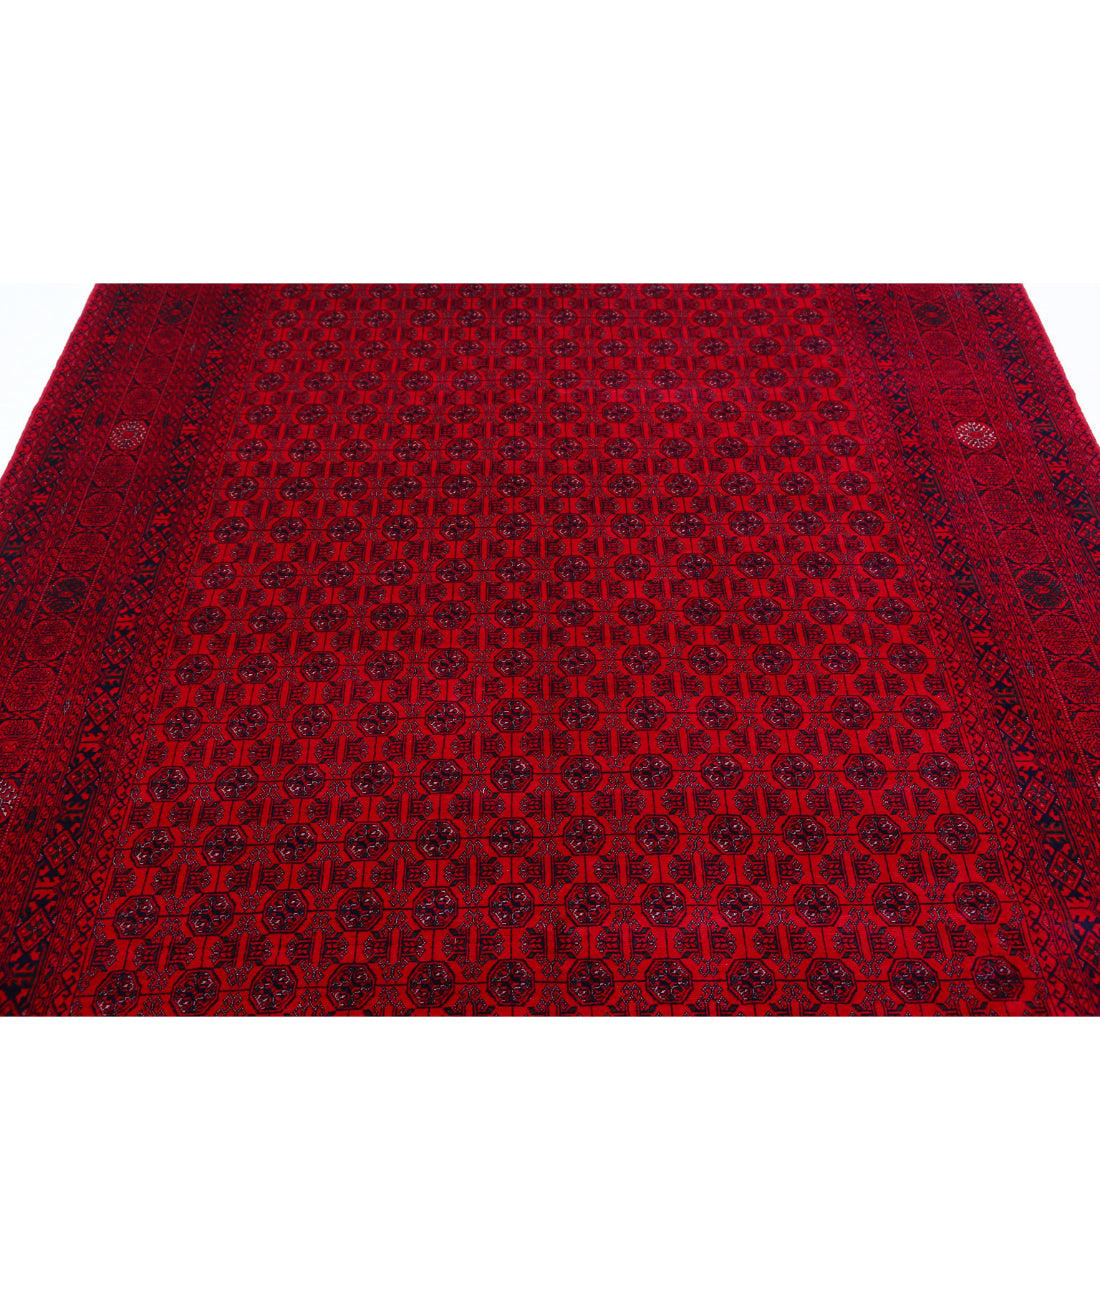 Hand Knotted Afghan Beljik Wool Rug - 6'6'' x 9'3'' 6'6'' x 9'3'' (195 X 278) / Red / Red